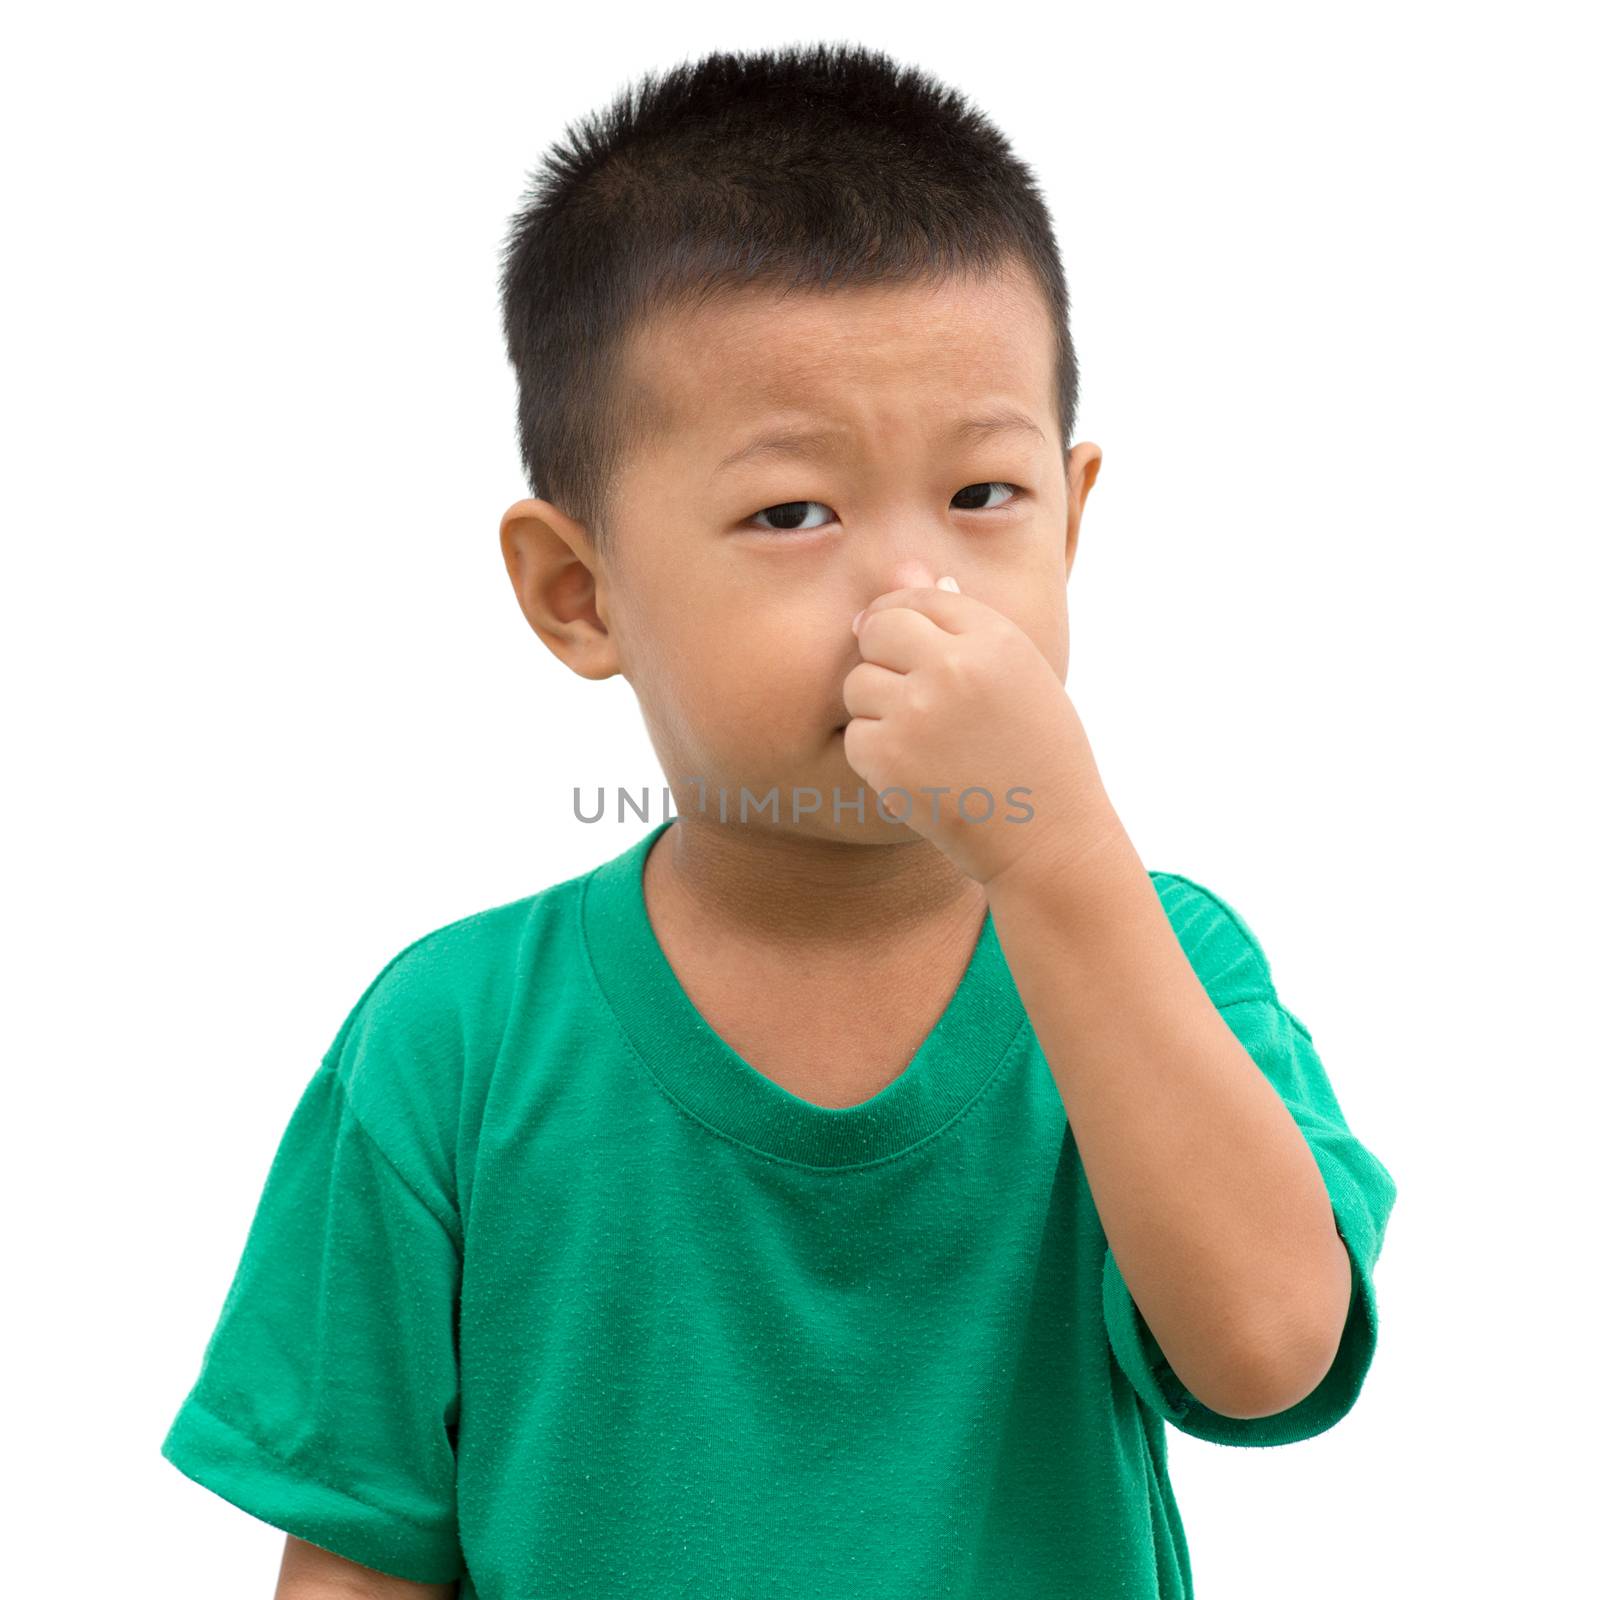 Asian child pinching his nose. Portrait of young boy isolated on white background.